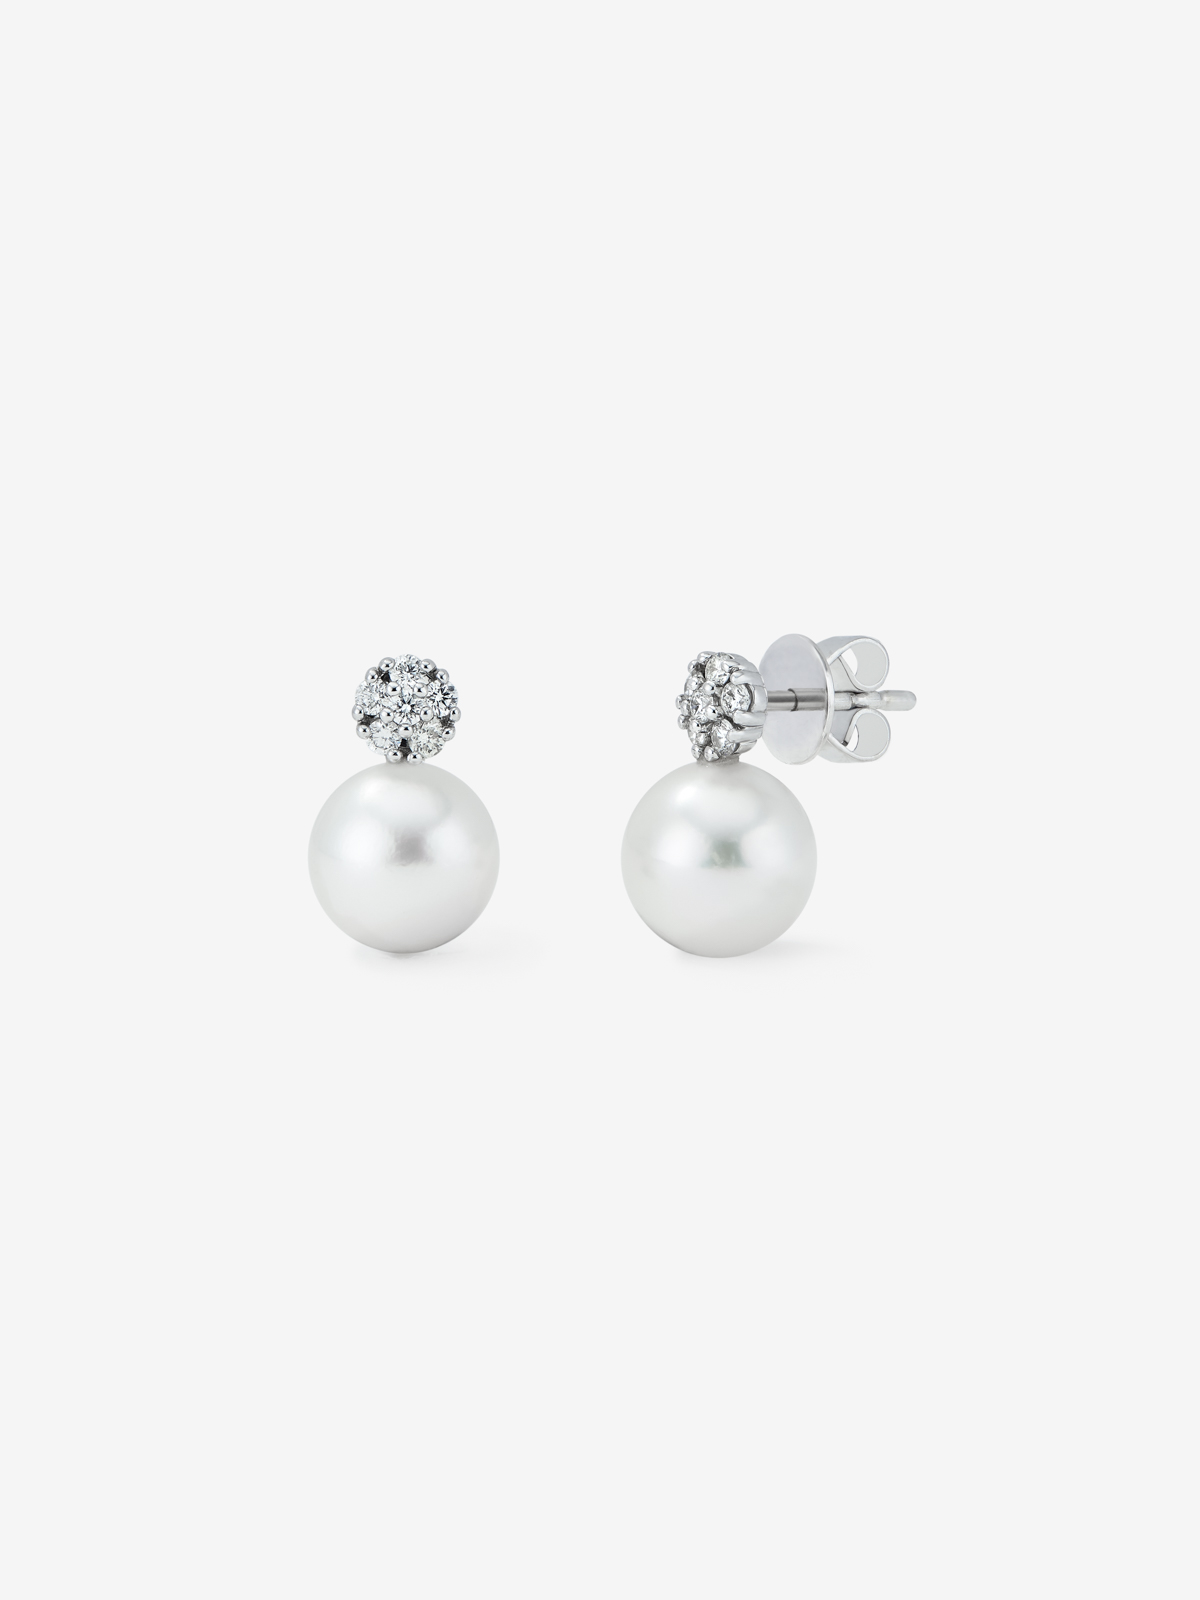 18k white gold earring with 9mm Australian pearl and diamond.